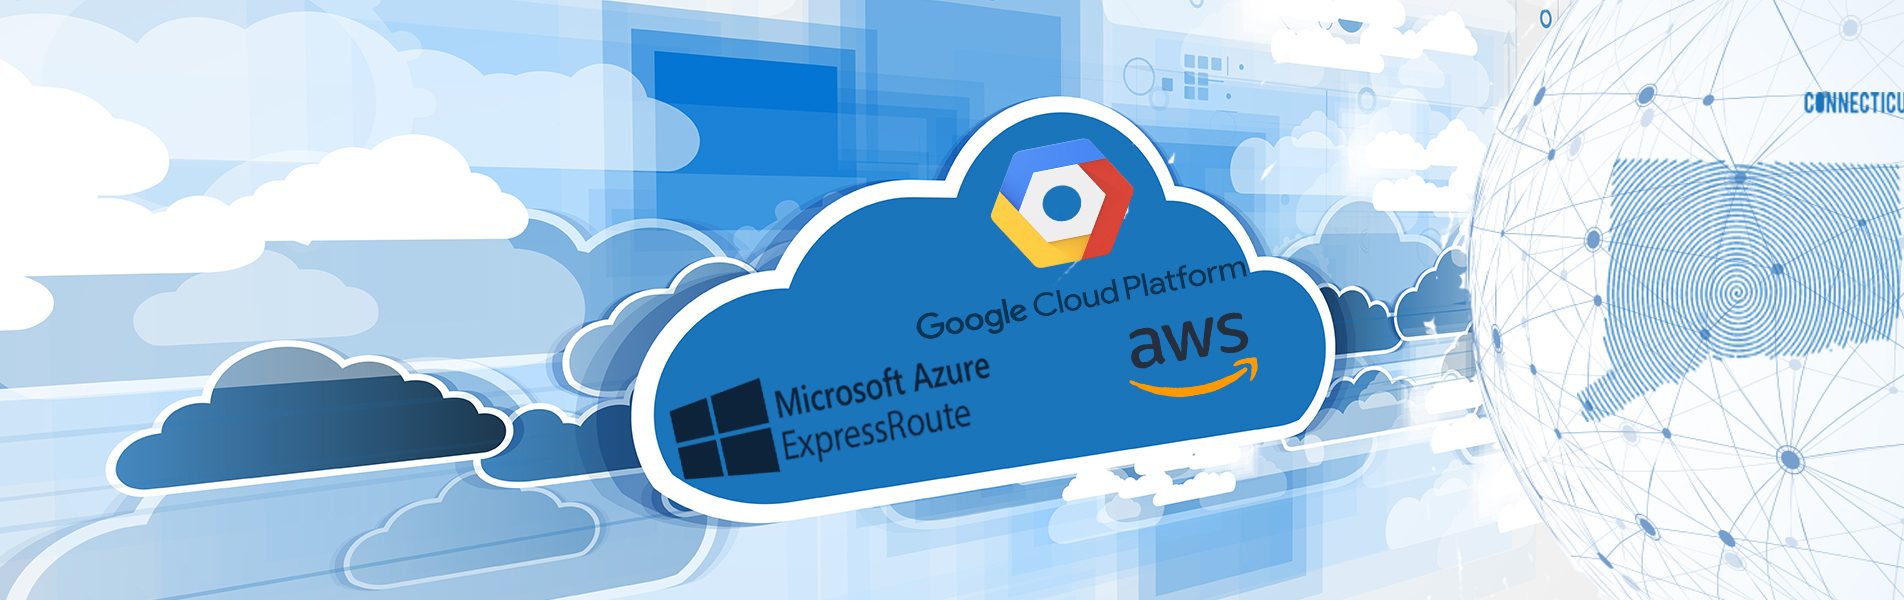 Cloud connect graphic, image of a cloud with Google Cloud Platform logo, Microsoft Azure ExpressRoute logo, and AWS logo